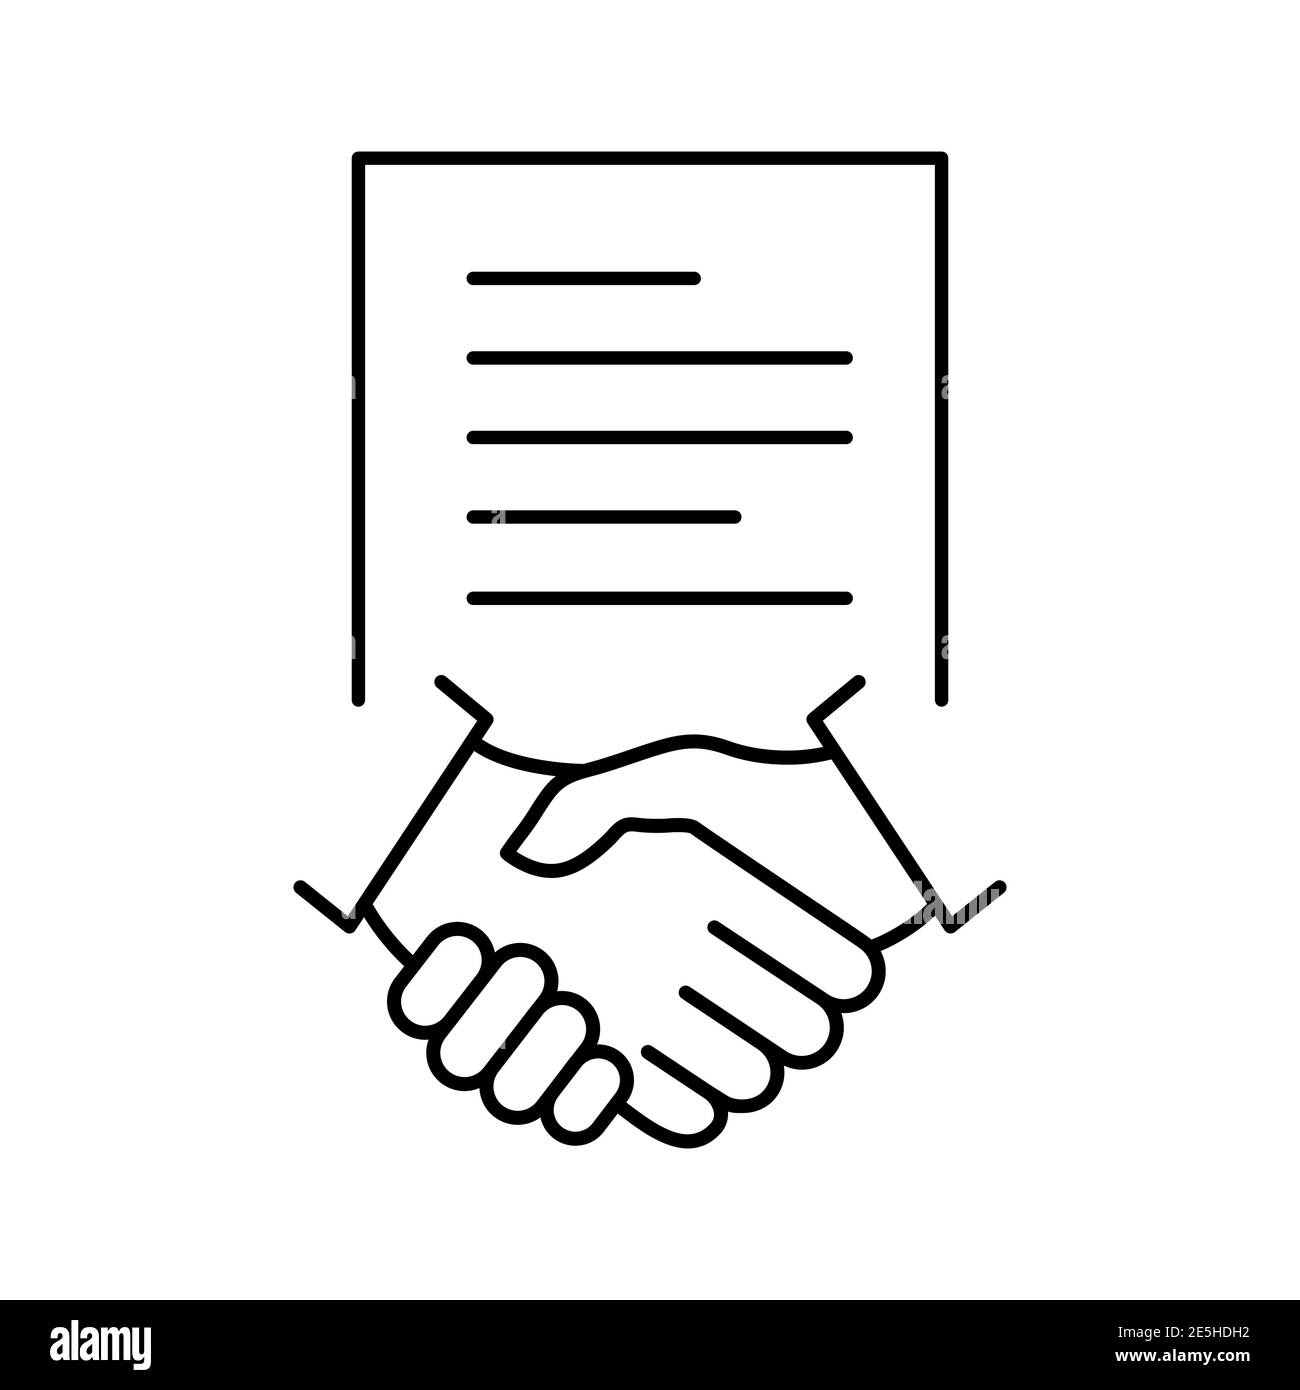 Business contract linear icon. Handshake teamwork line concept. Vector isolated on white. Stock Vector